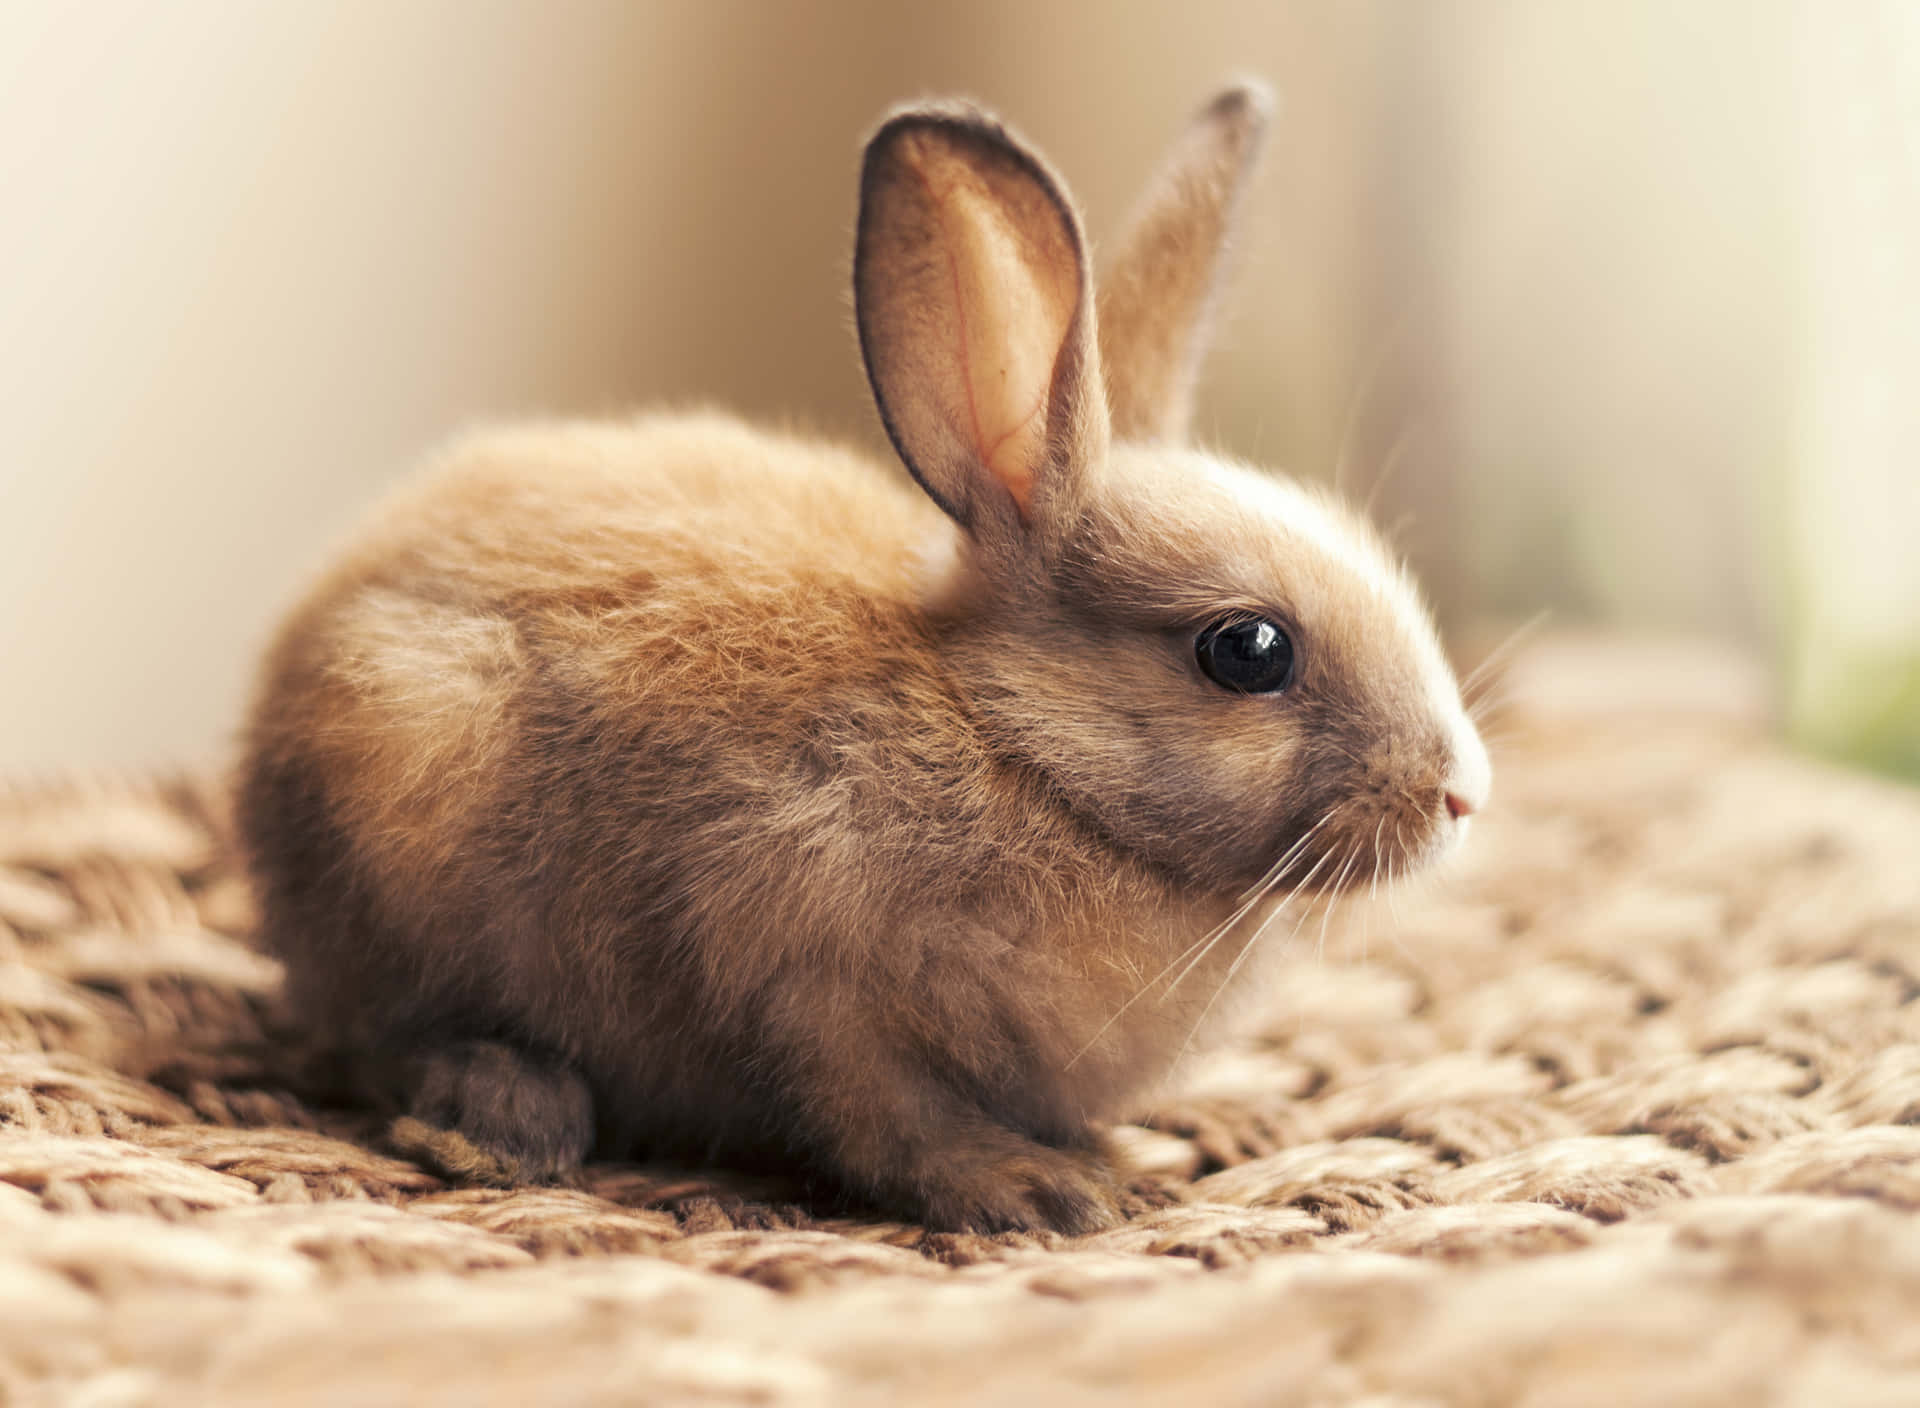 A Small Brown Rabbit Sitting On A Rug Wallpaper